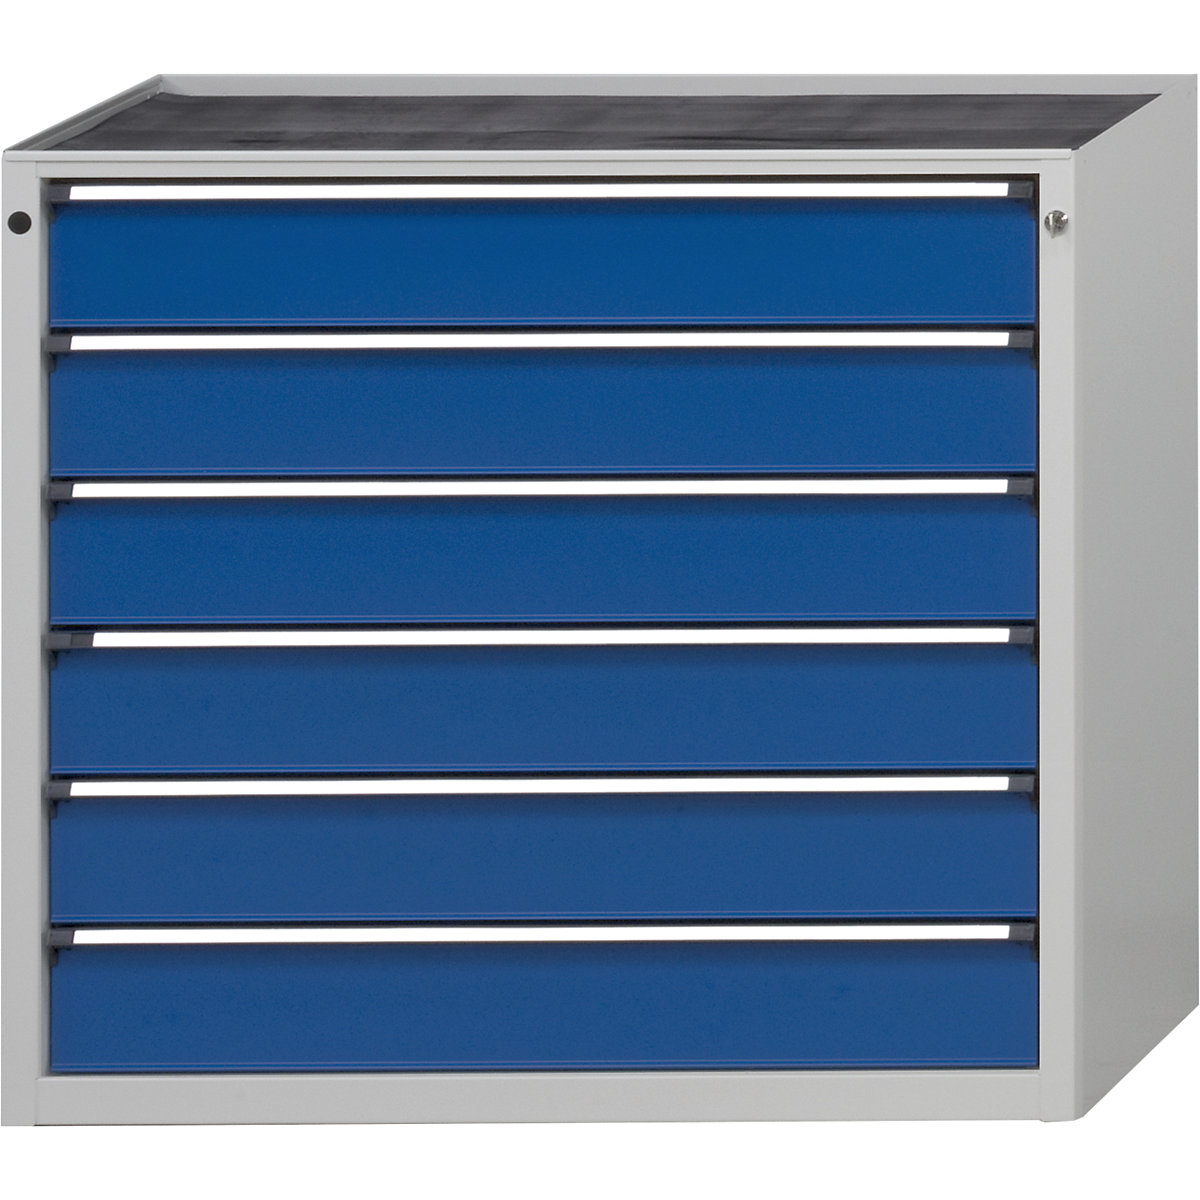 Drawer cupboard without worktop – ANKE, width 1060 mm, max. drawer load 200 kg, 6 x 150 mm drawers, front in gentian blue-7